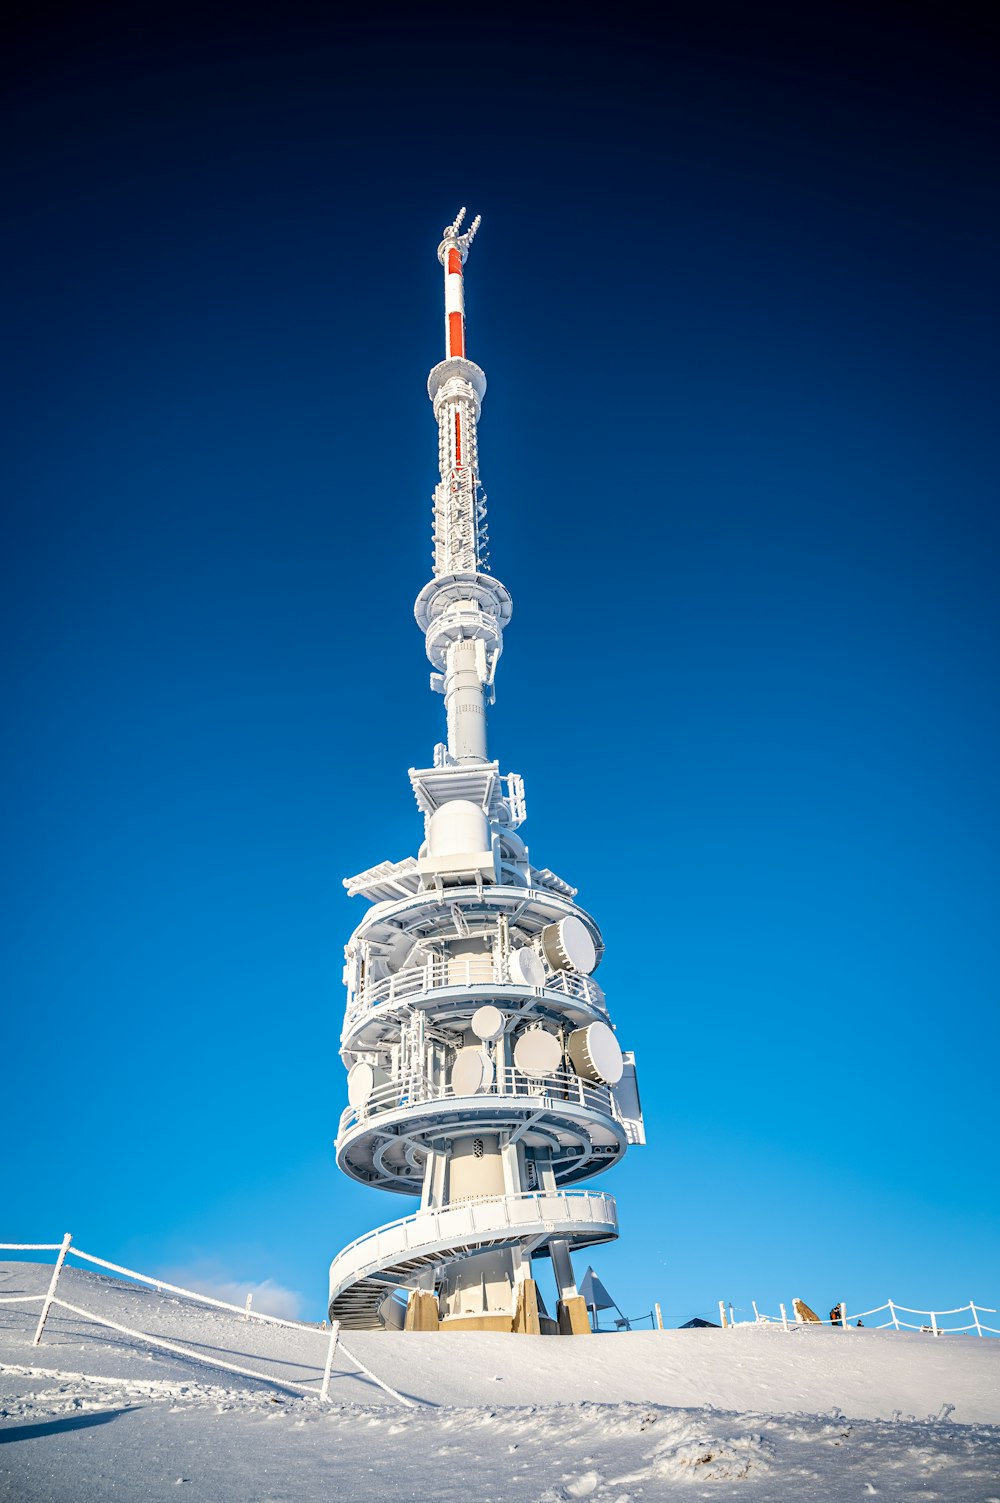 white and red tower under blue sky during daytime